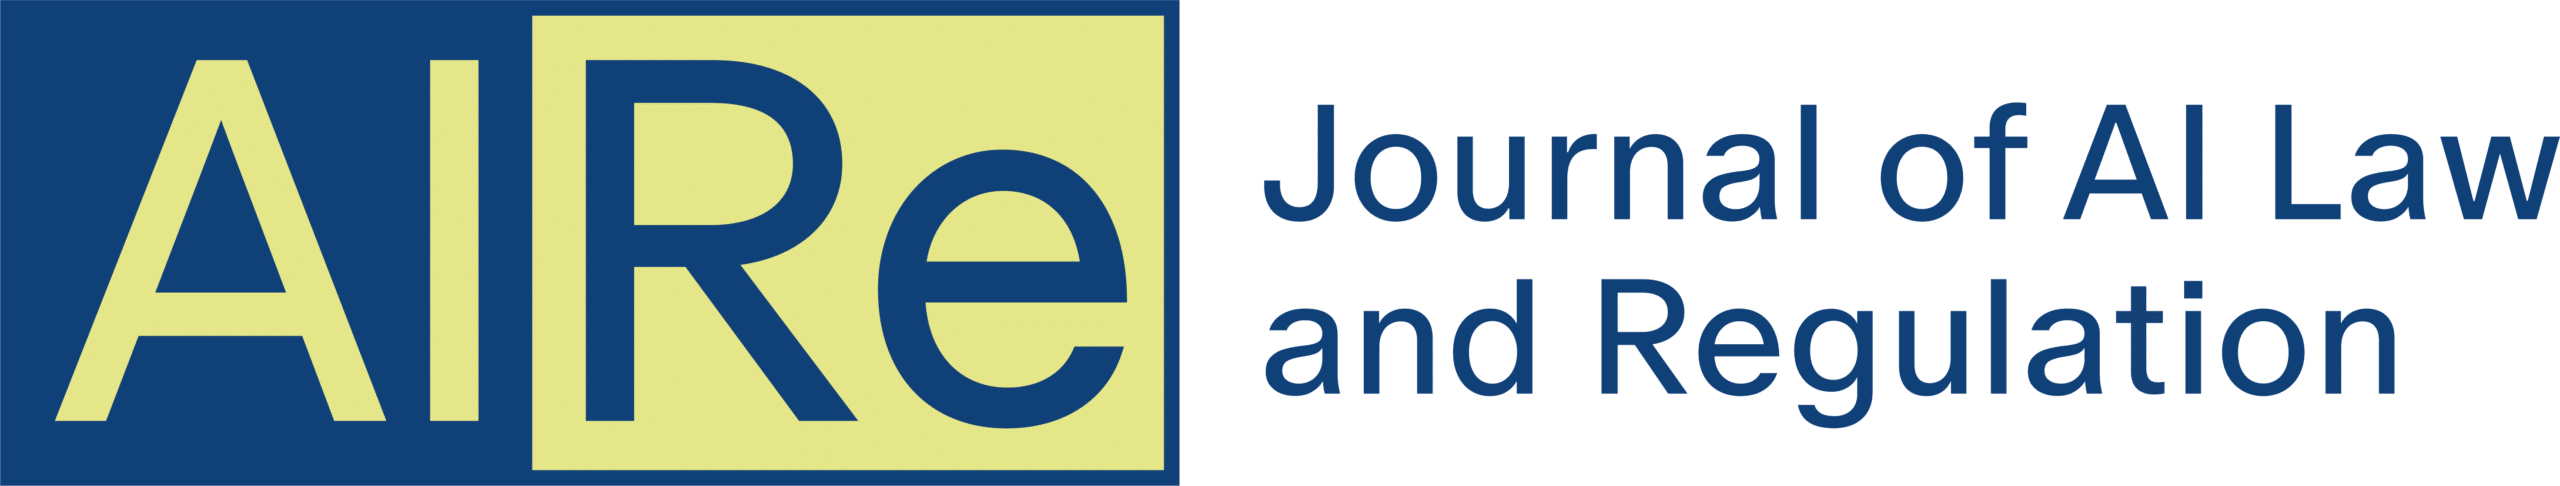 AIRe – Journal of AI Law and Regulation - AIRe Logo